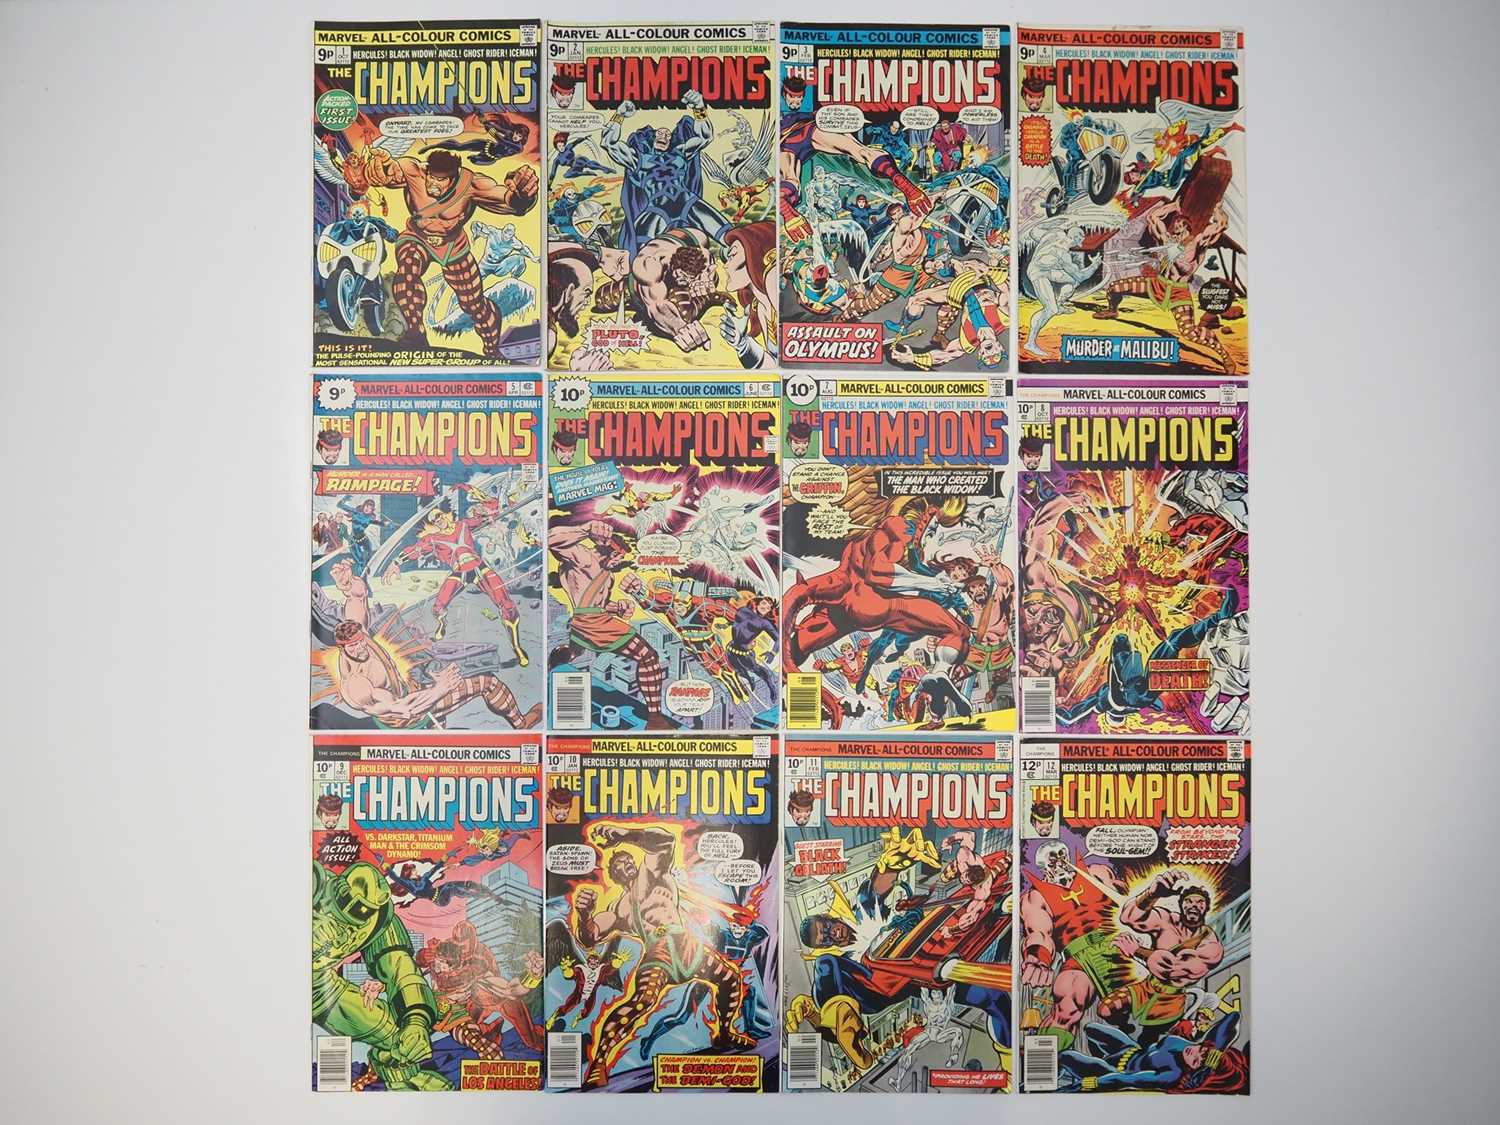 THE CHAMPIONS #1, 2, 3, 4, 5, 6, 7, 8, 9, 10, 11, 12 (12 in Lot) - (1975/1977 - MARVEL - UK Price